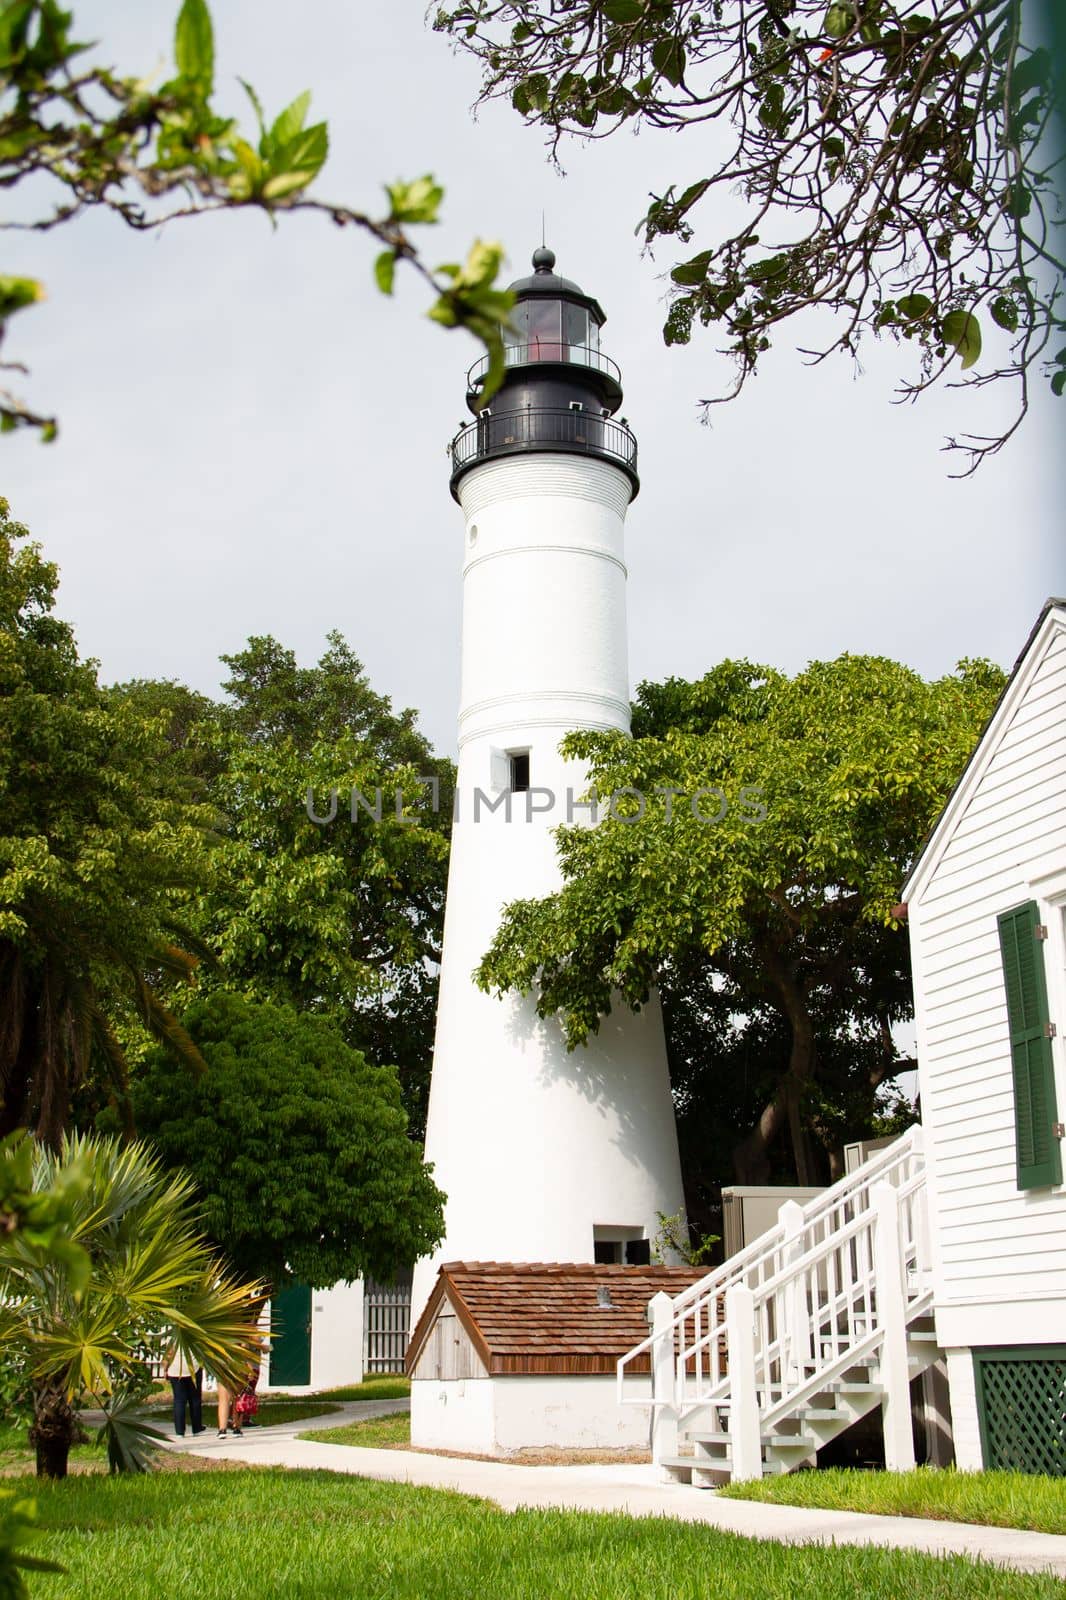 Historic Key West lighthouse located in Key West, Florida by Granchinho